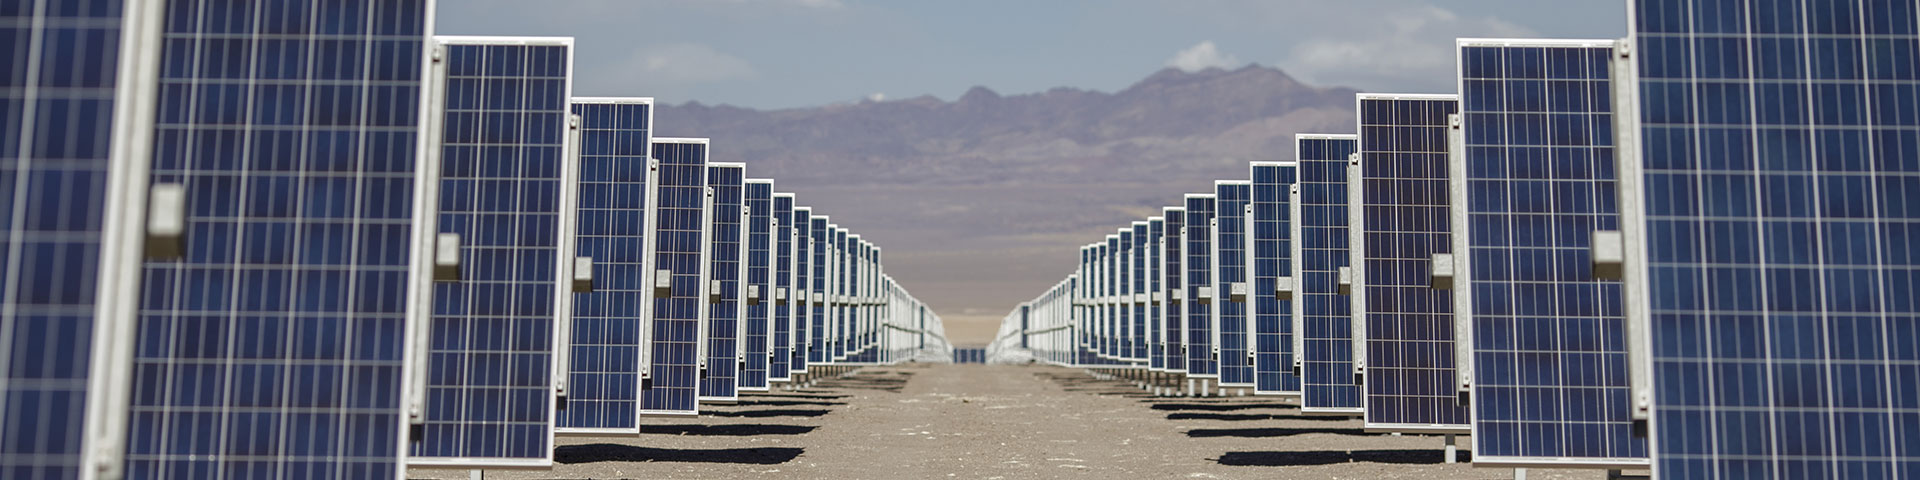 Several rows of solar collectors stand in an open field.